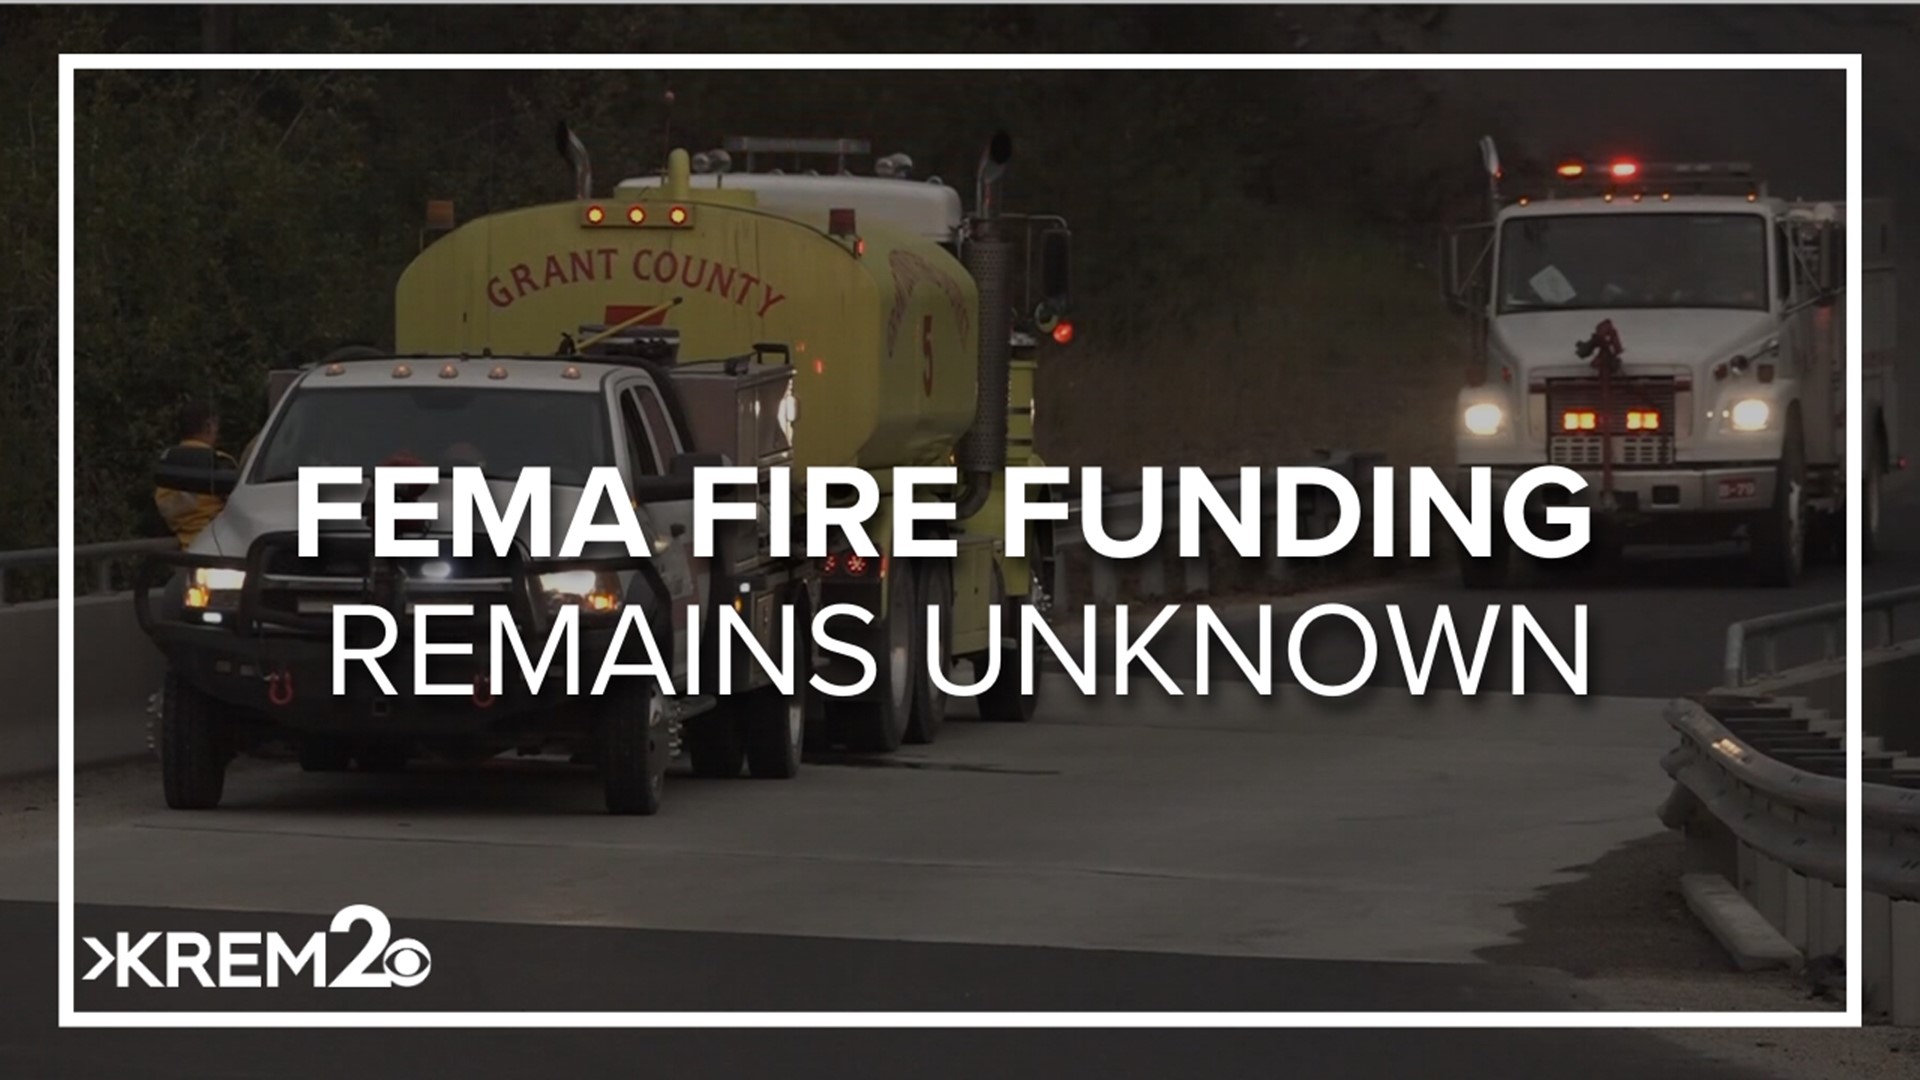 Fixing the damage from the Gray and Oregon Rd. Fires remain a question mark. Local officials say the fires do meet the state requirements for FEMA funding.